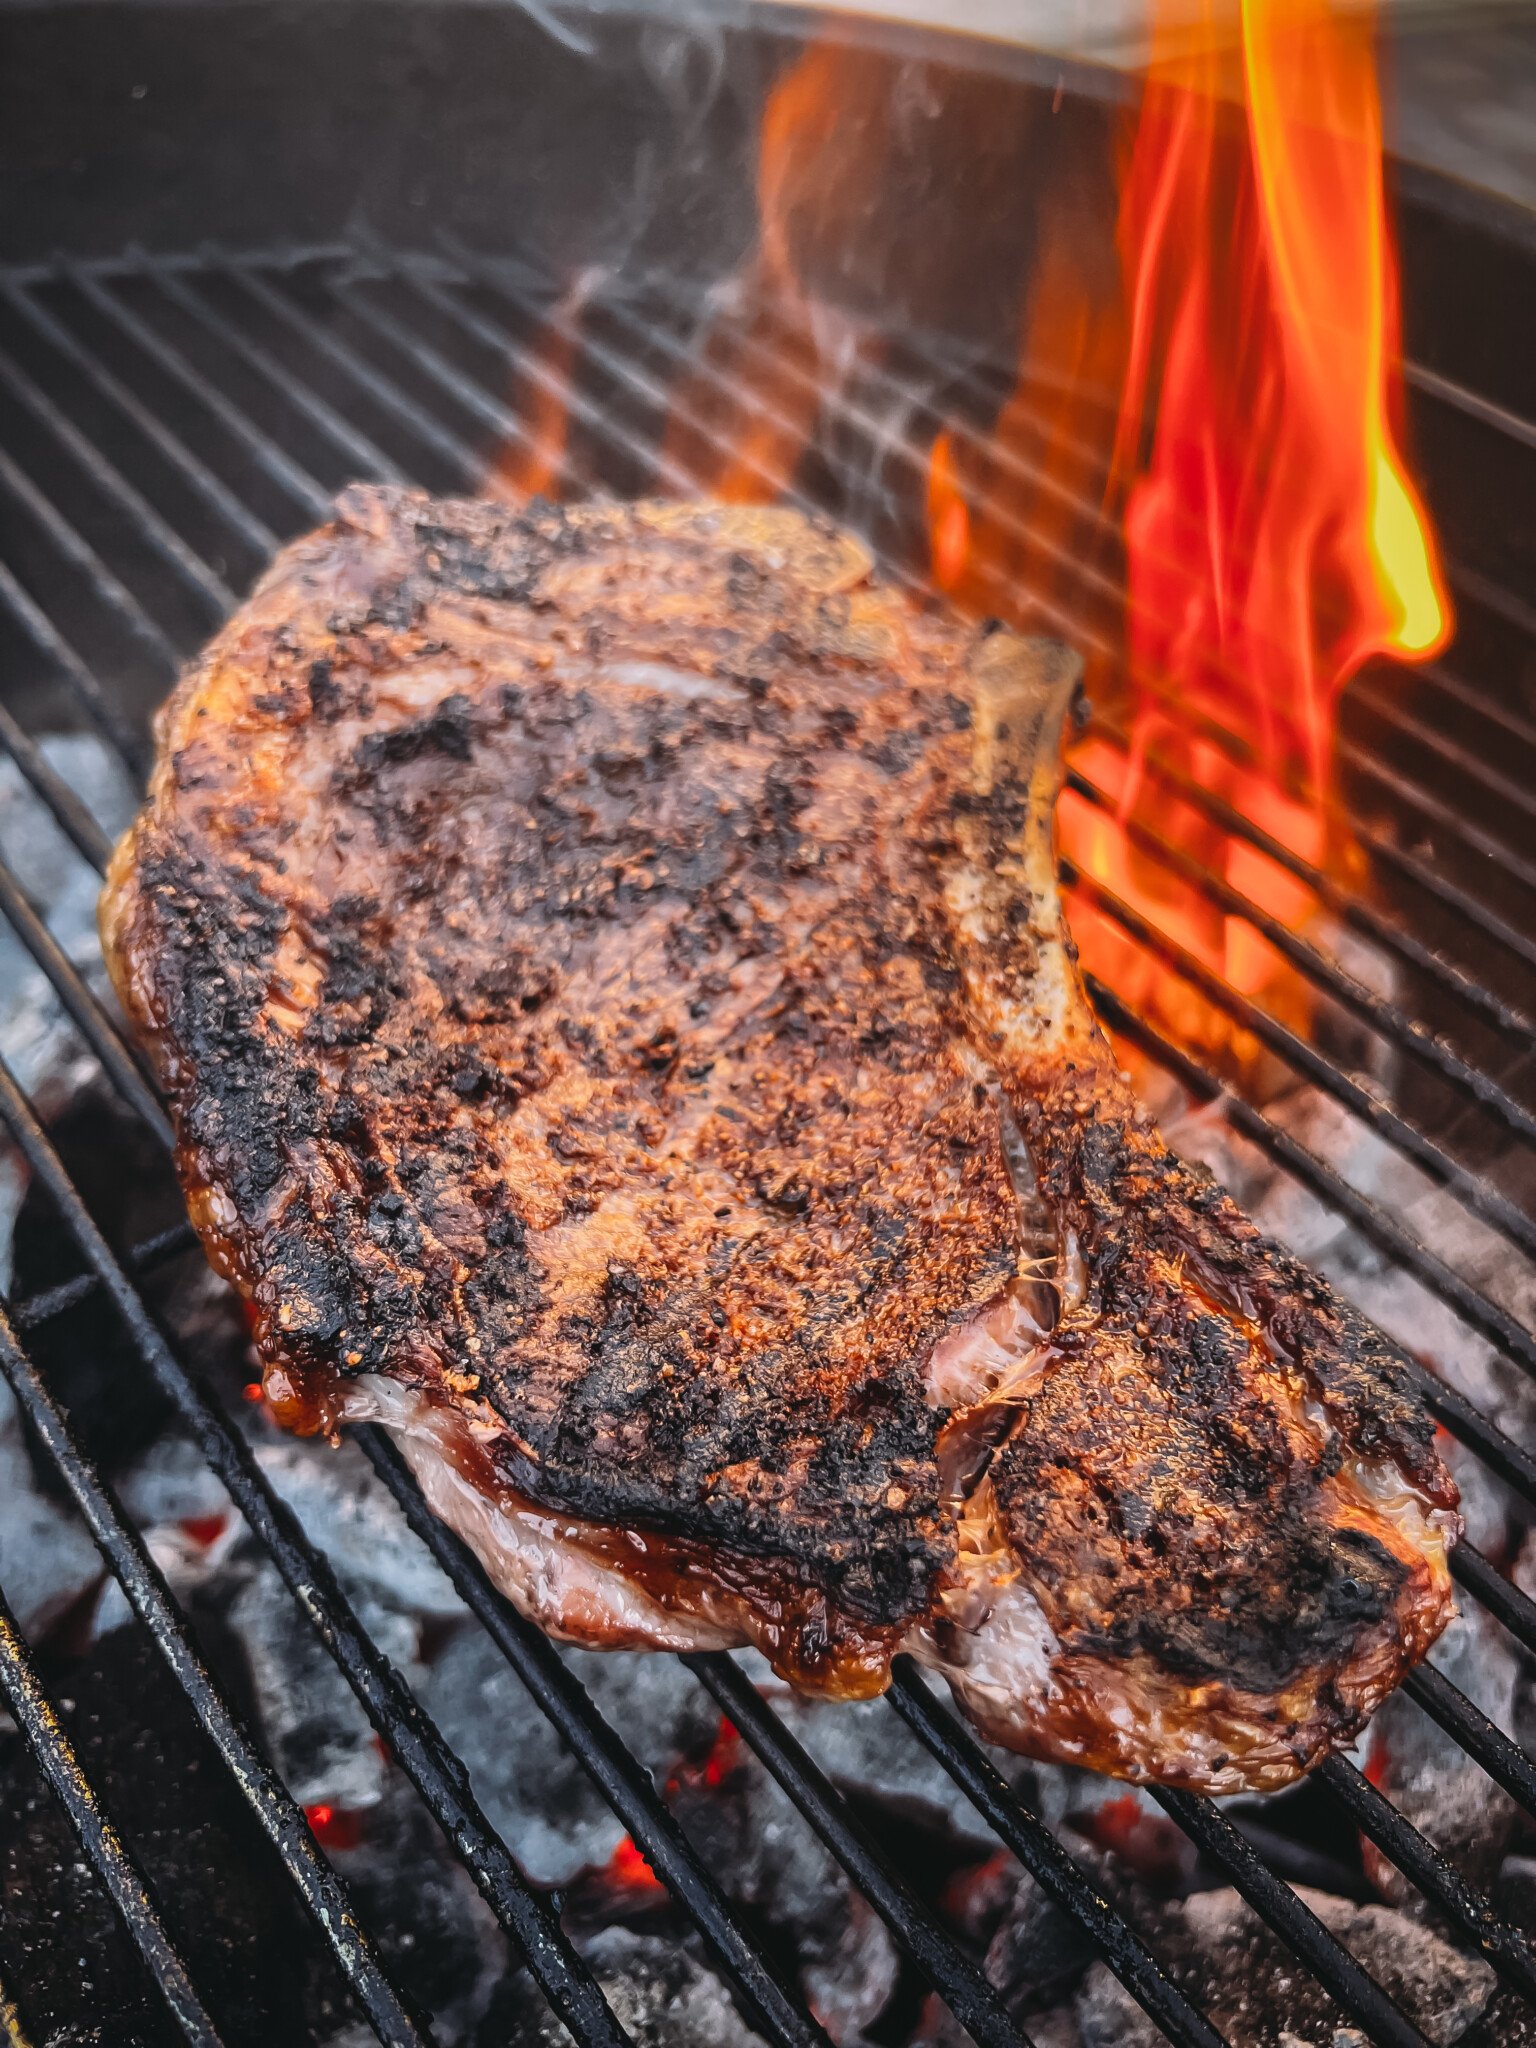 Budget BBQ: Top Cheap Meats to Smoke for Amazing Flavor